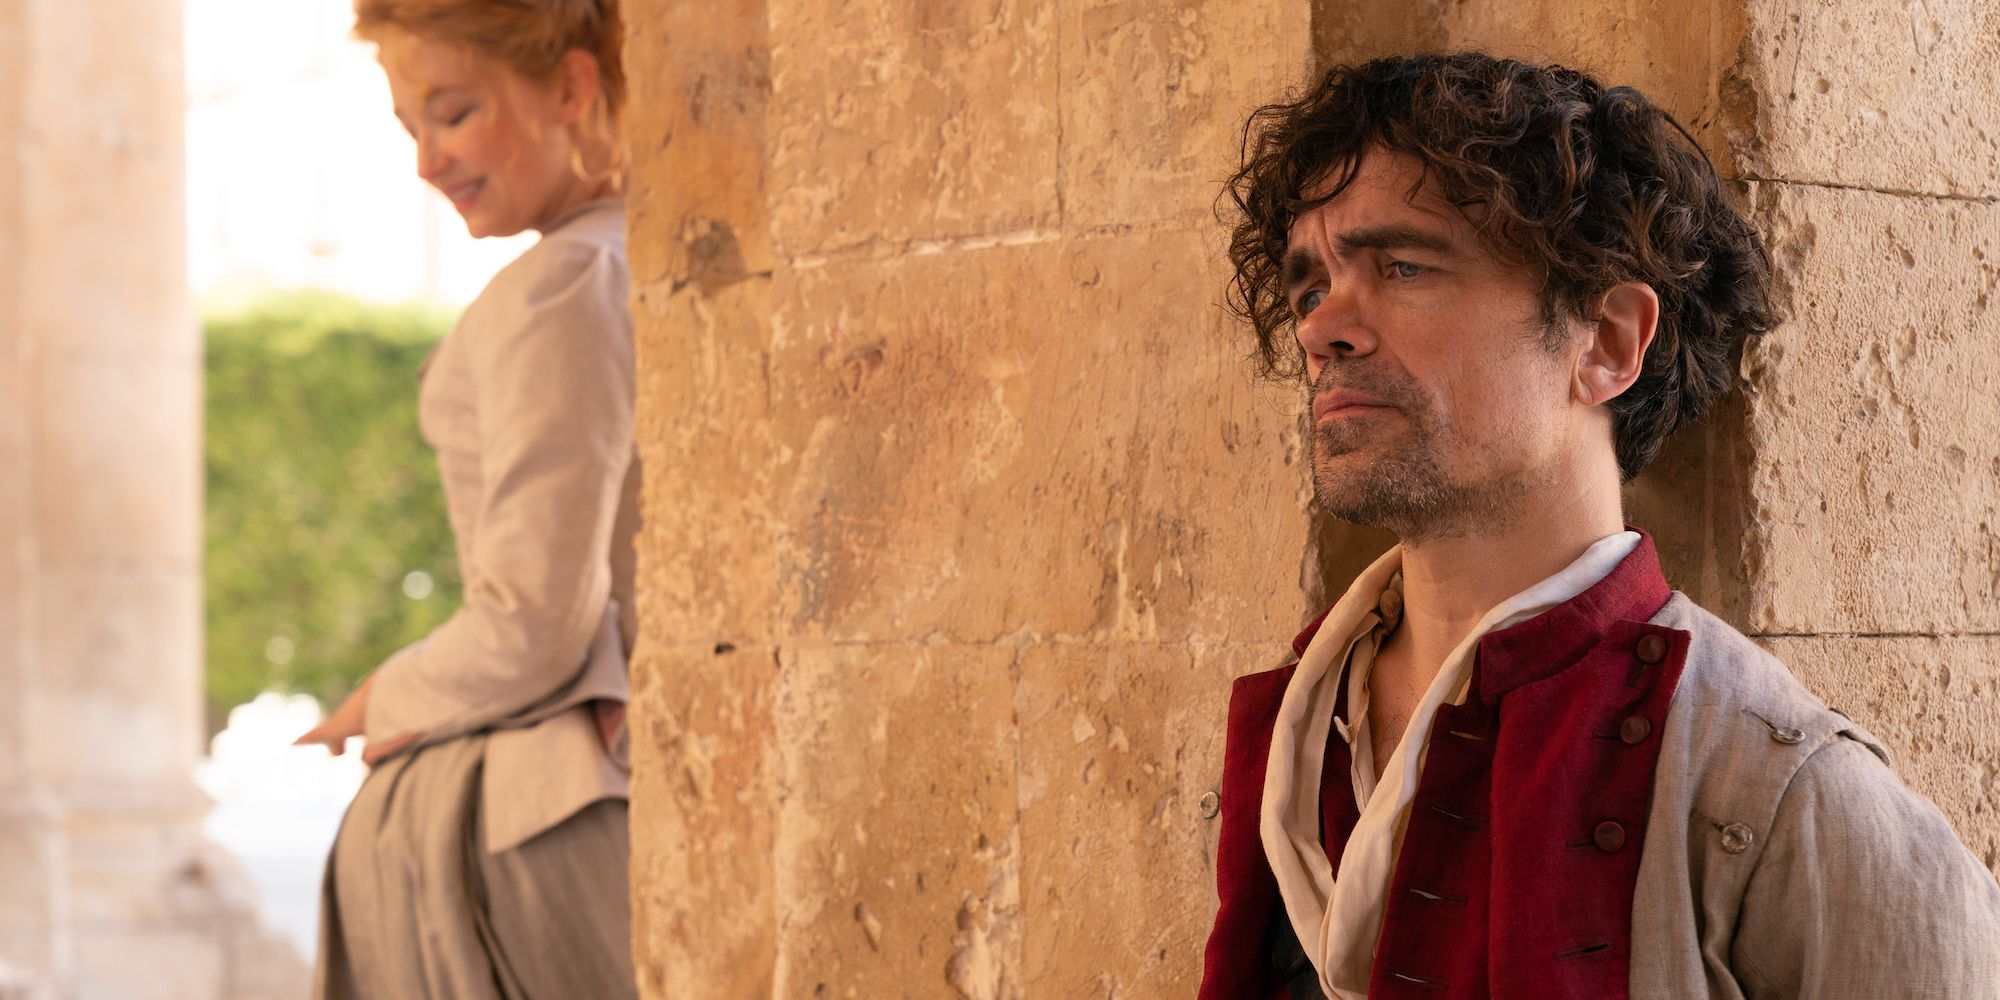 Peter Dinklage Is Awards-Worthy In Musical Romance Adaptation